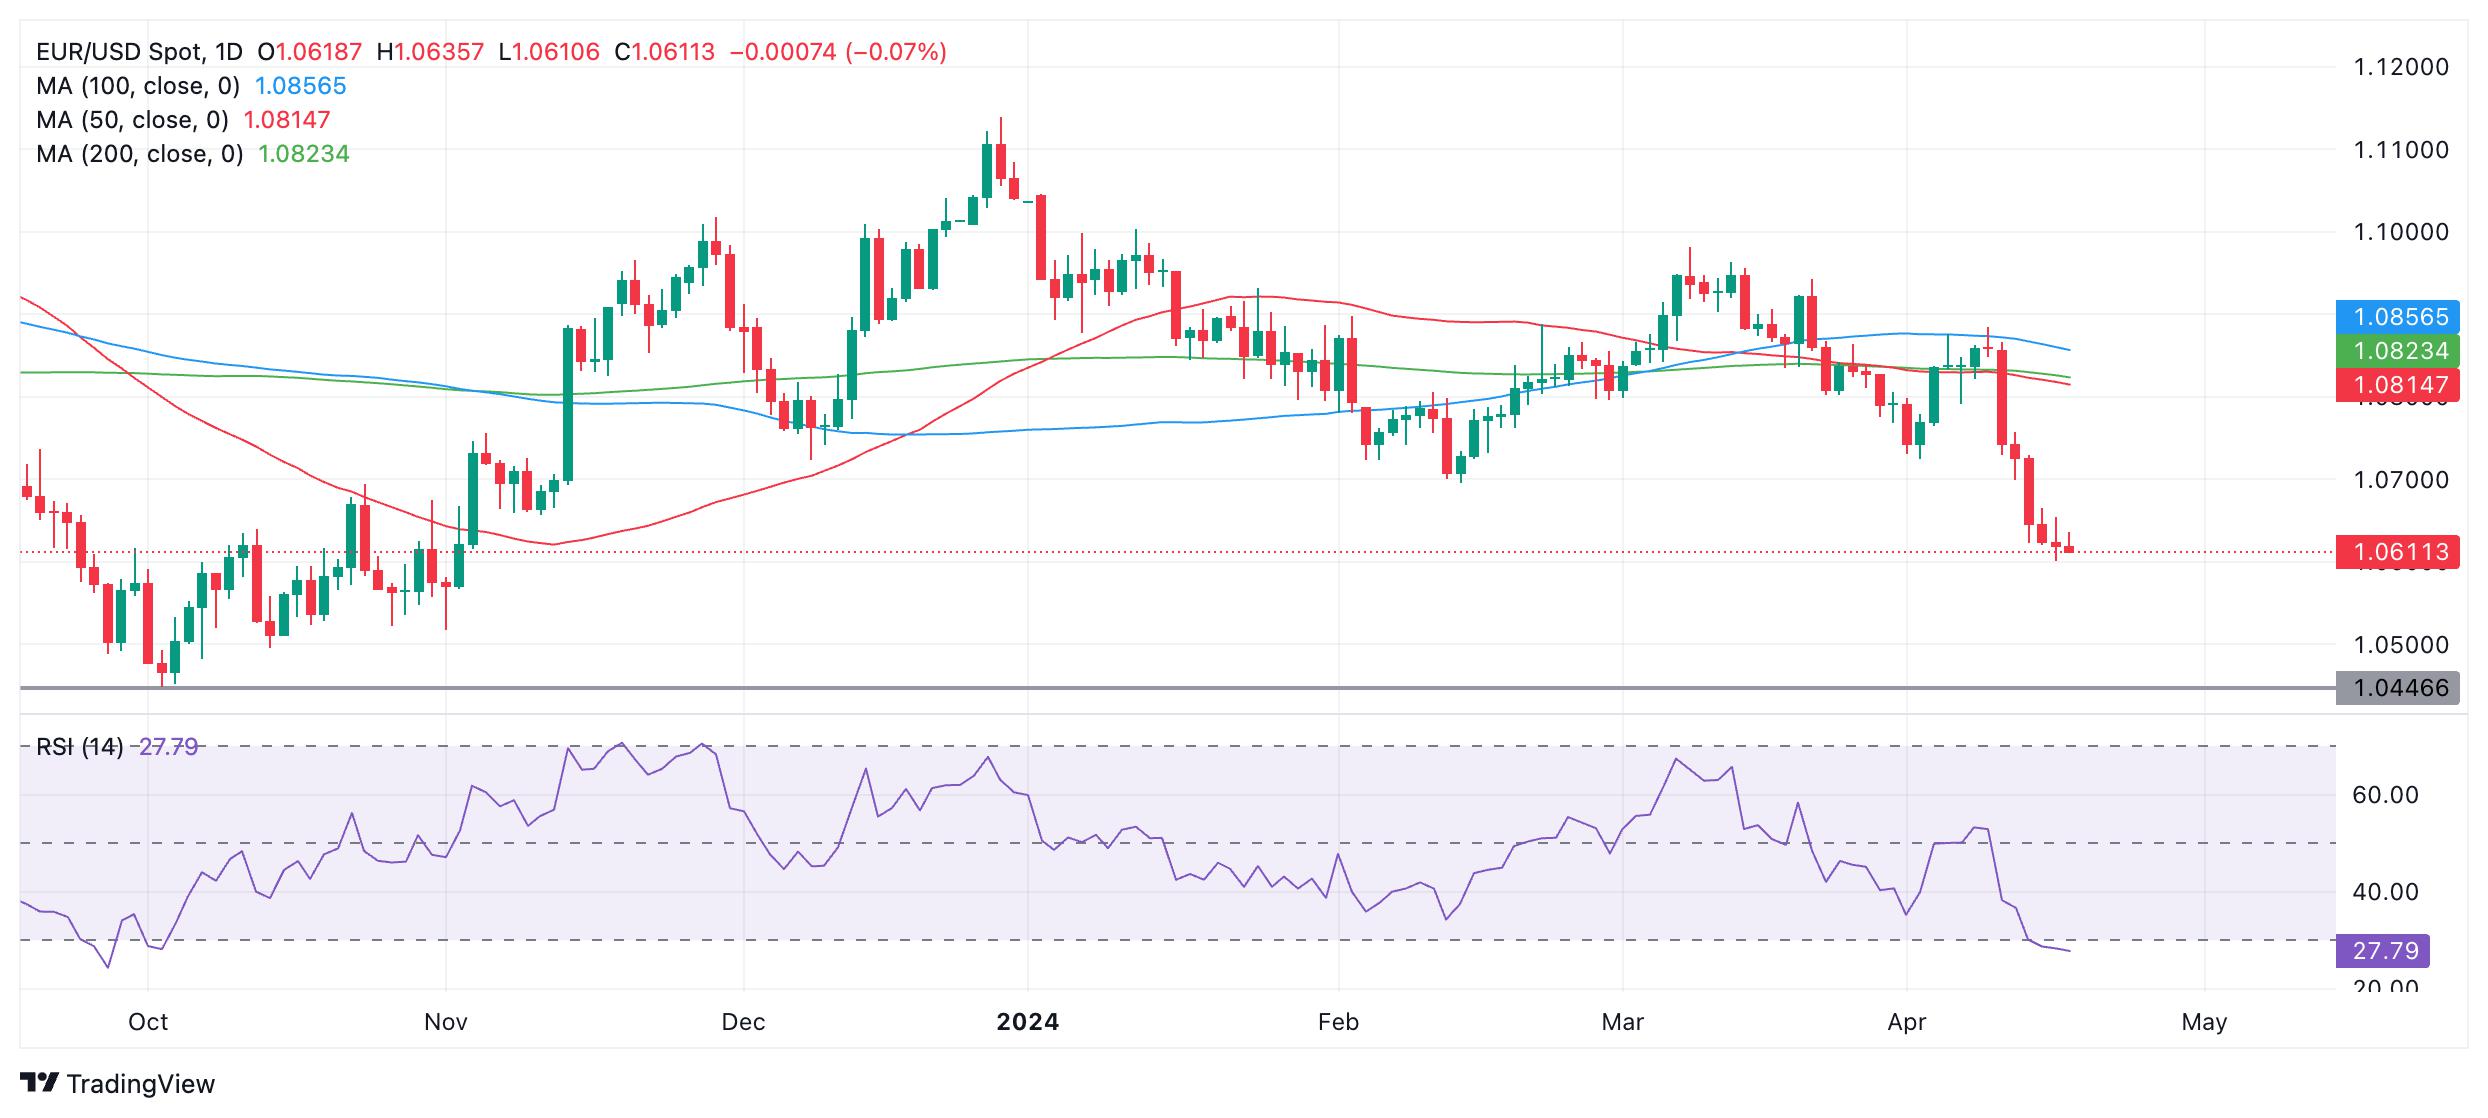 EUR/USD enters oversold zone in the 1.0600s ahead of final Eurozone inflation reading